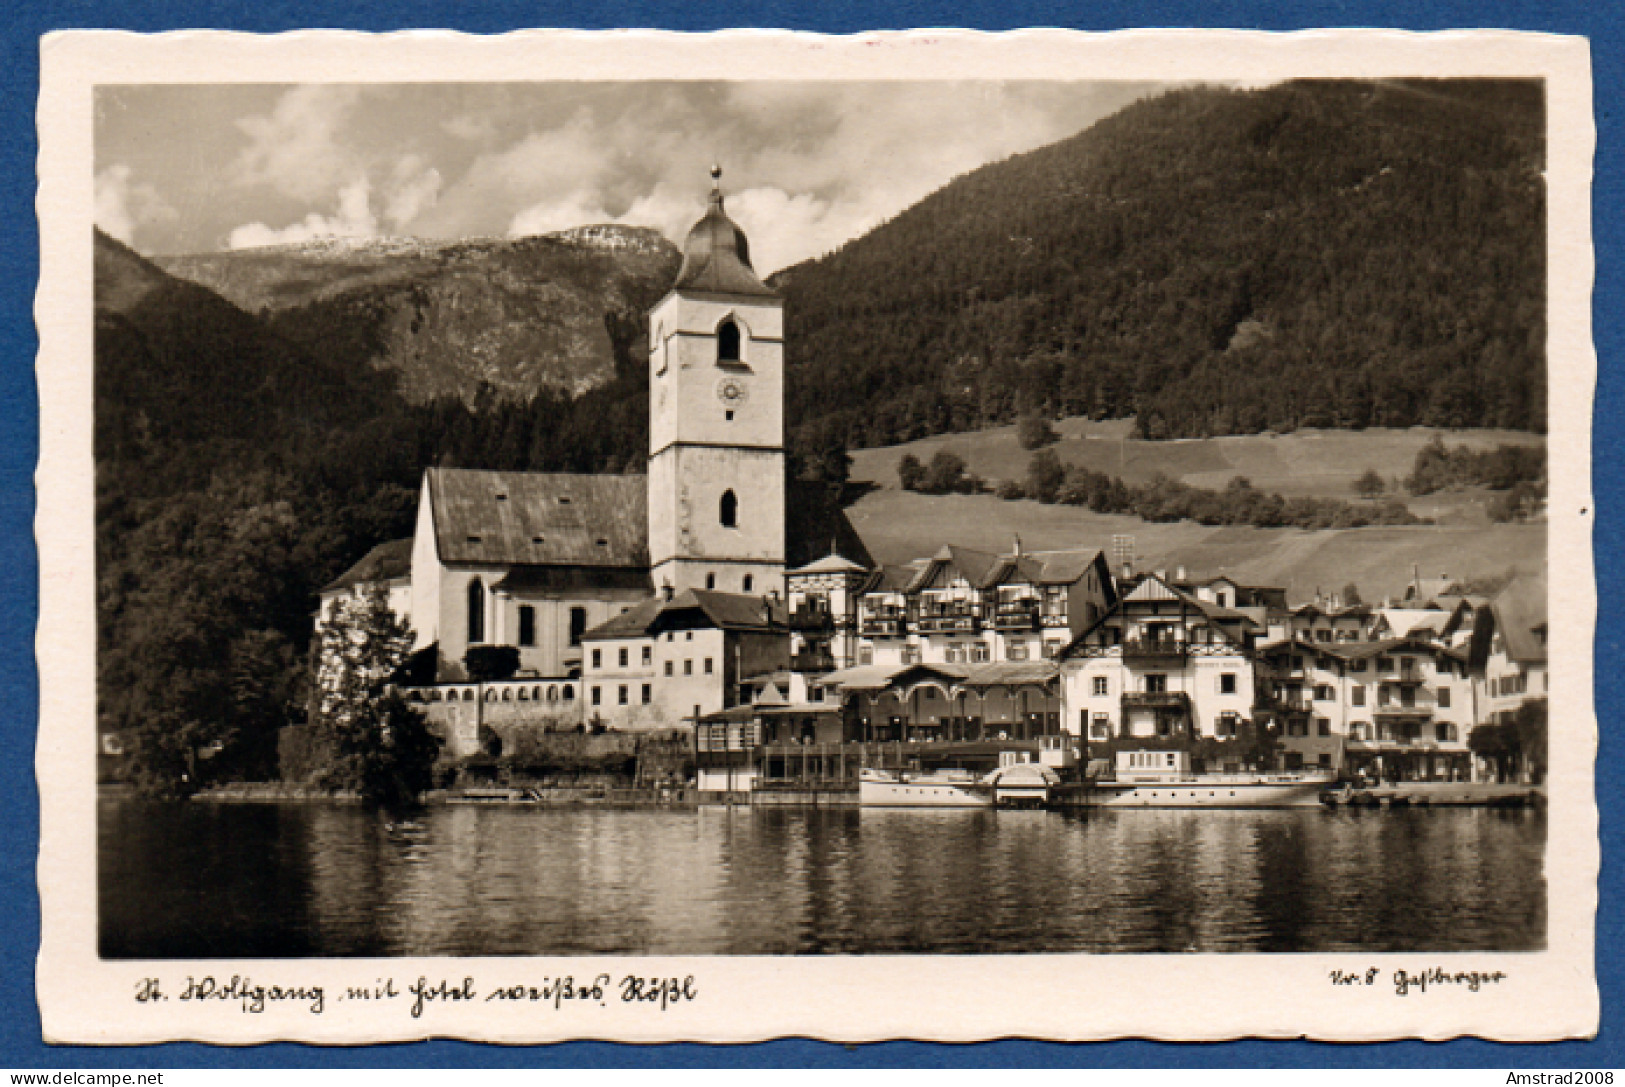 ST. WOLFGANG AM WOLFGANGSEE - OSTERREICH - AUTRICHE - St. Wolfgang